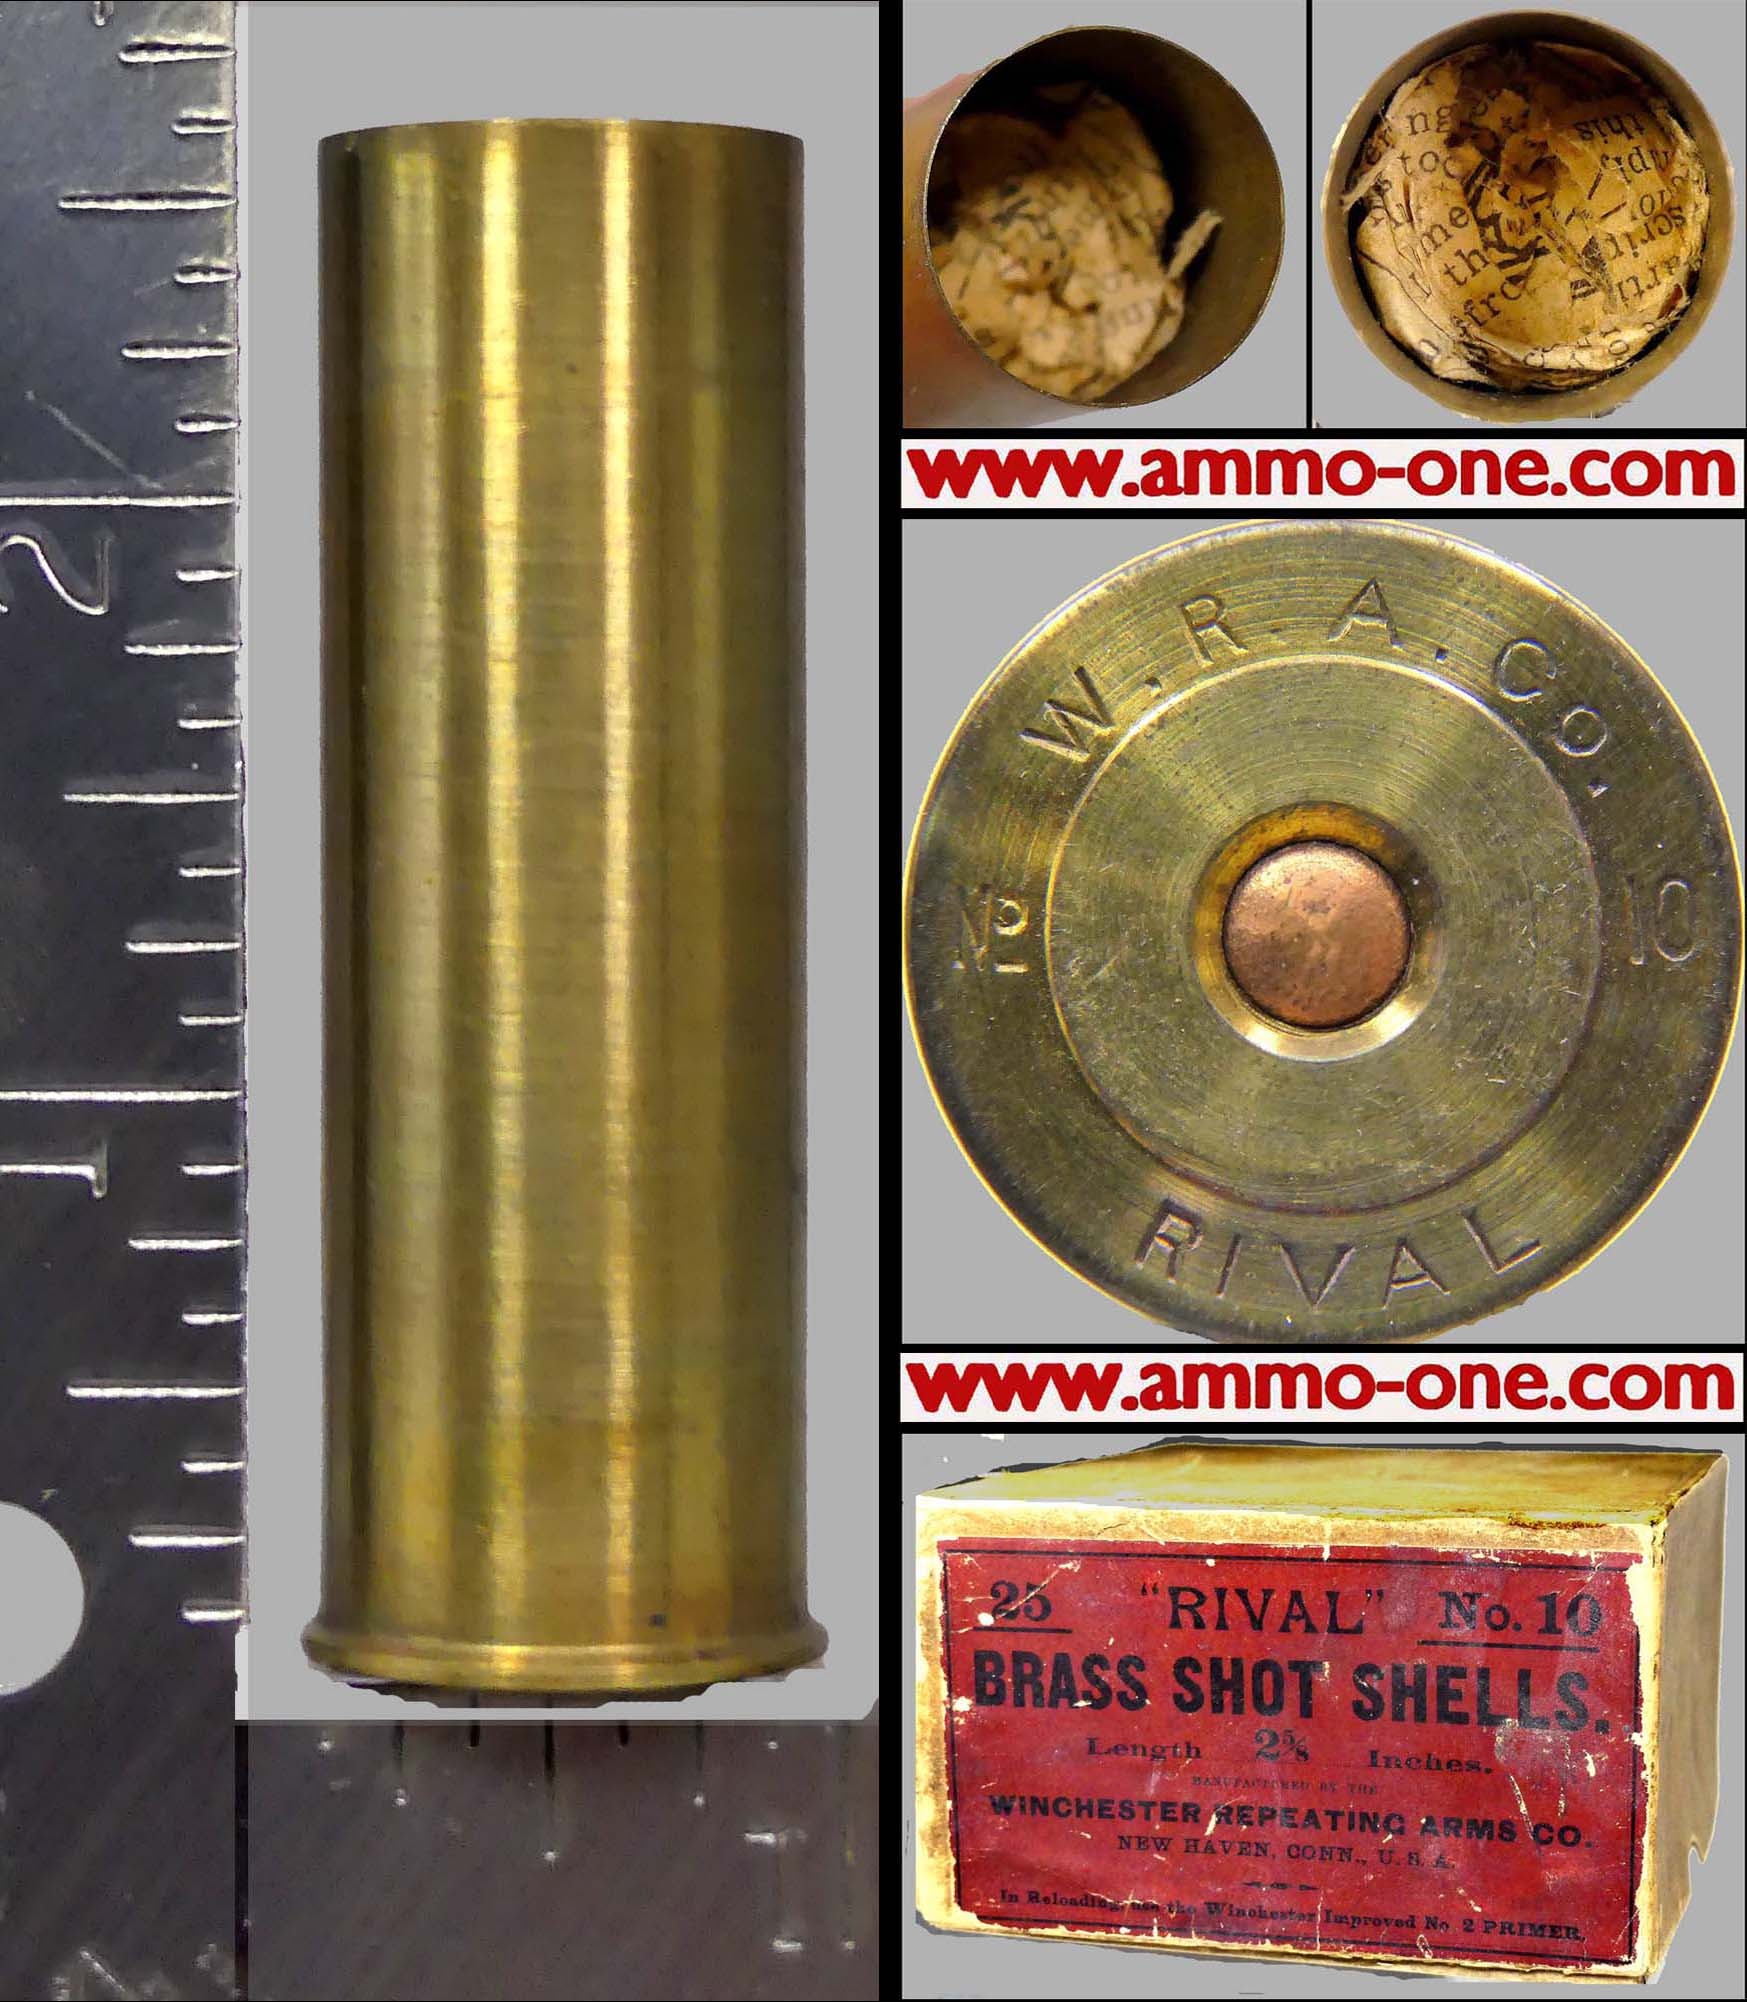 10 Gauge # 3, W.R.A. RIVAL, Brass Shell, One Cartridge not a Box - Ammo-One1